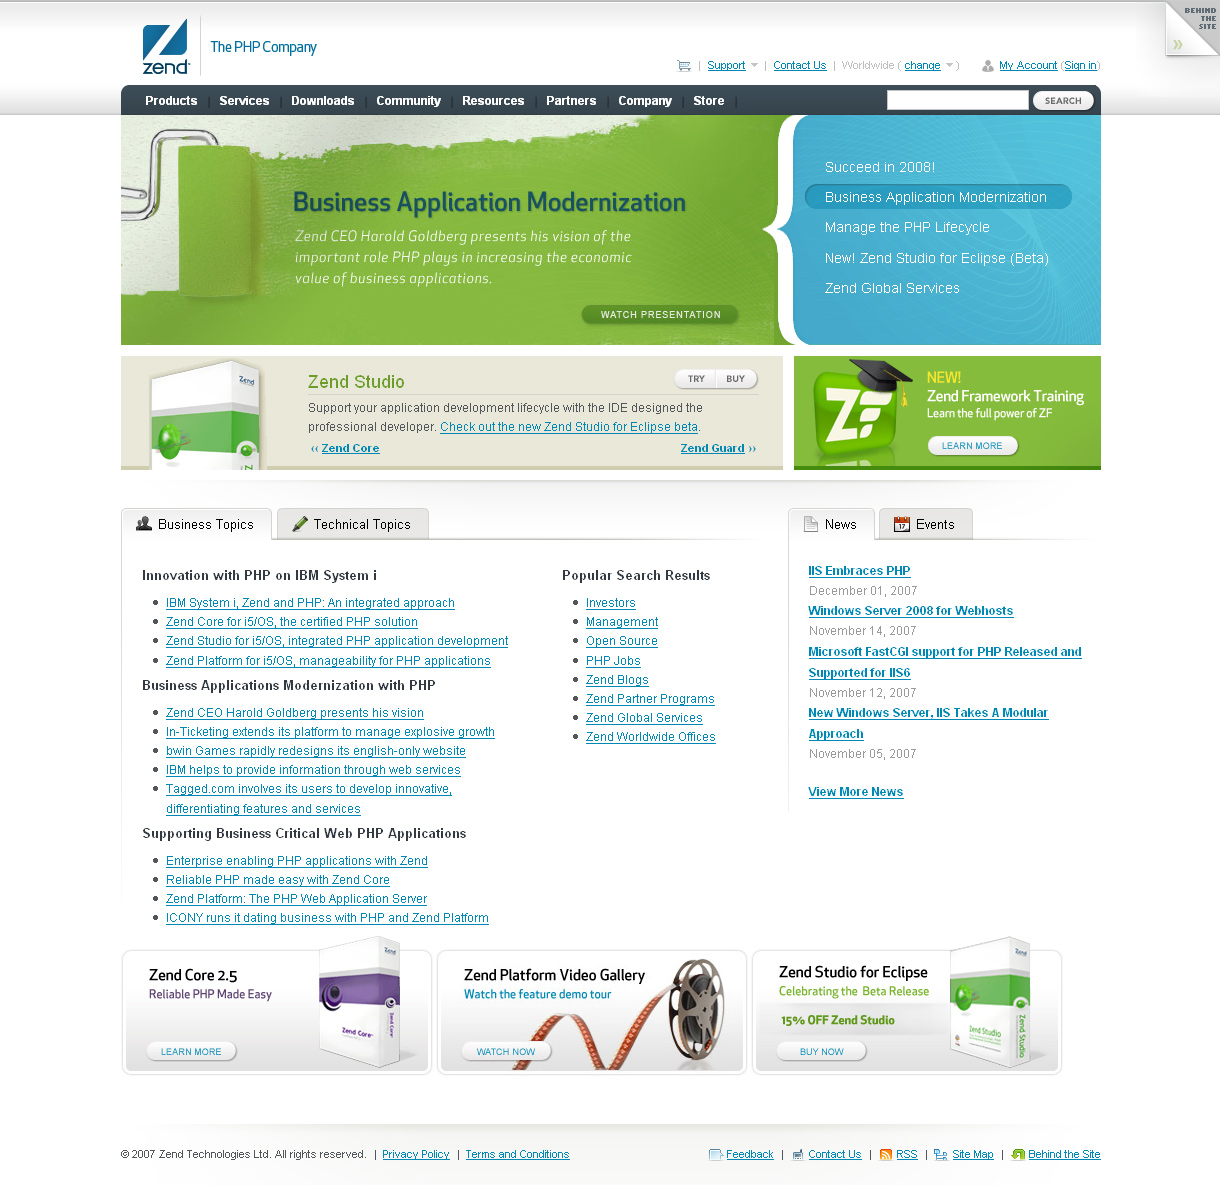 Zend – The PHP Company in 2007